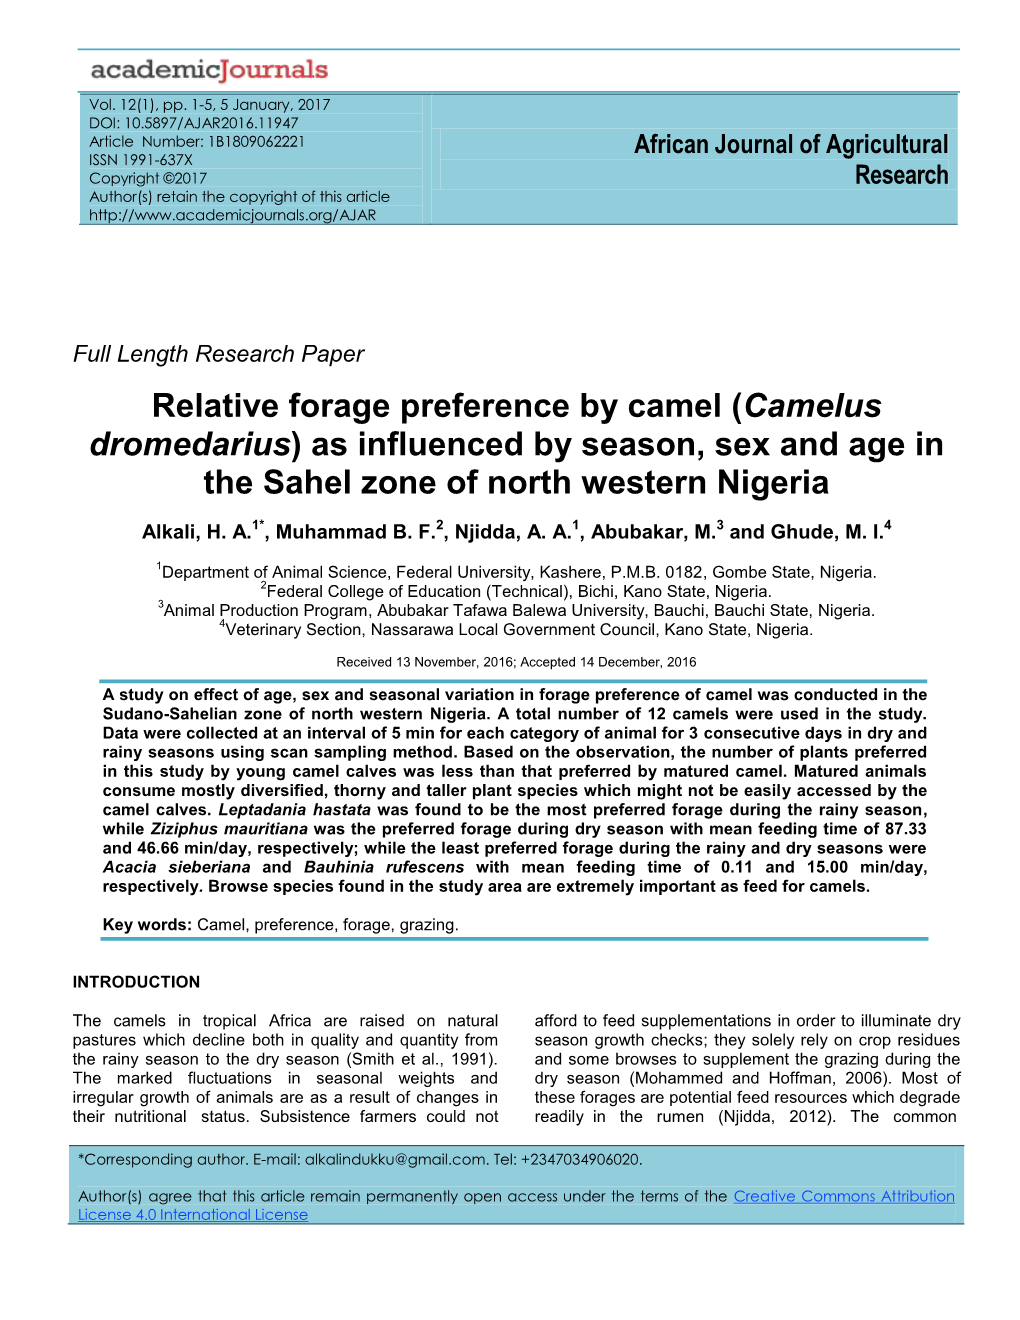 Relative Forage Preference by Camel (Camelus Dromedarius) As Influenced by Season, Sex and Age in the Sahel Zone of North Western Nigeria